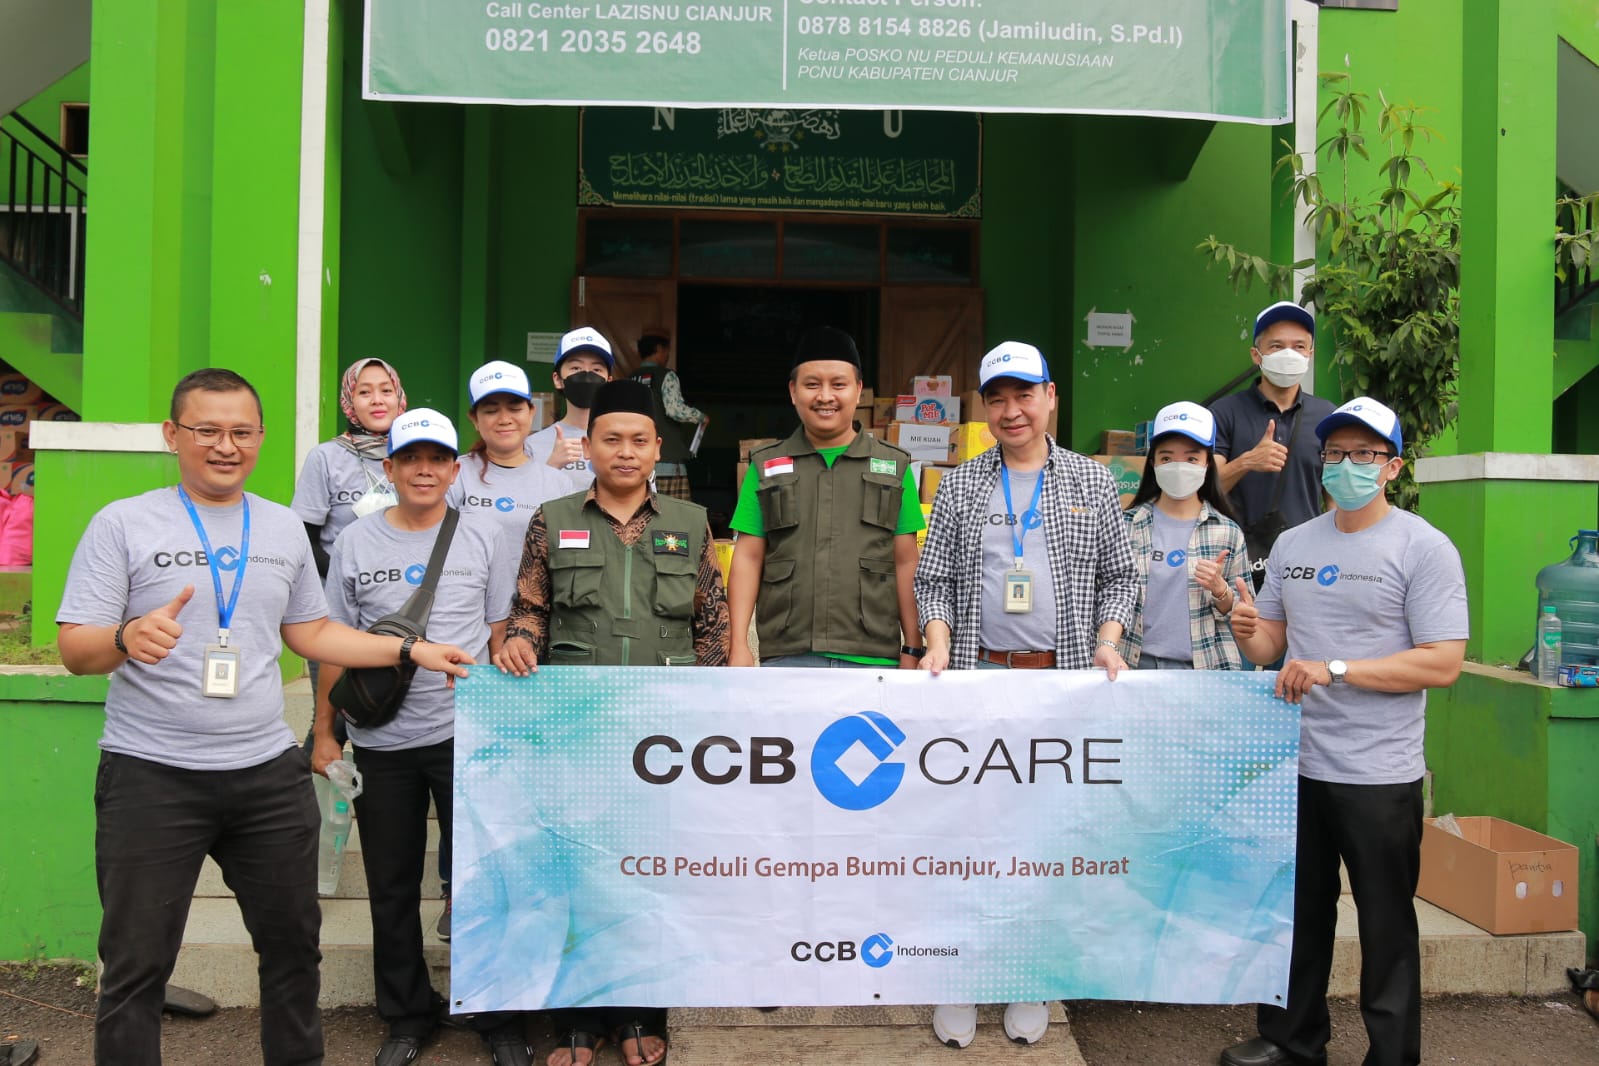 CCB Indonesia's social assistance for the earthquake disaster refugees in Cianjur, West Java